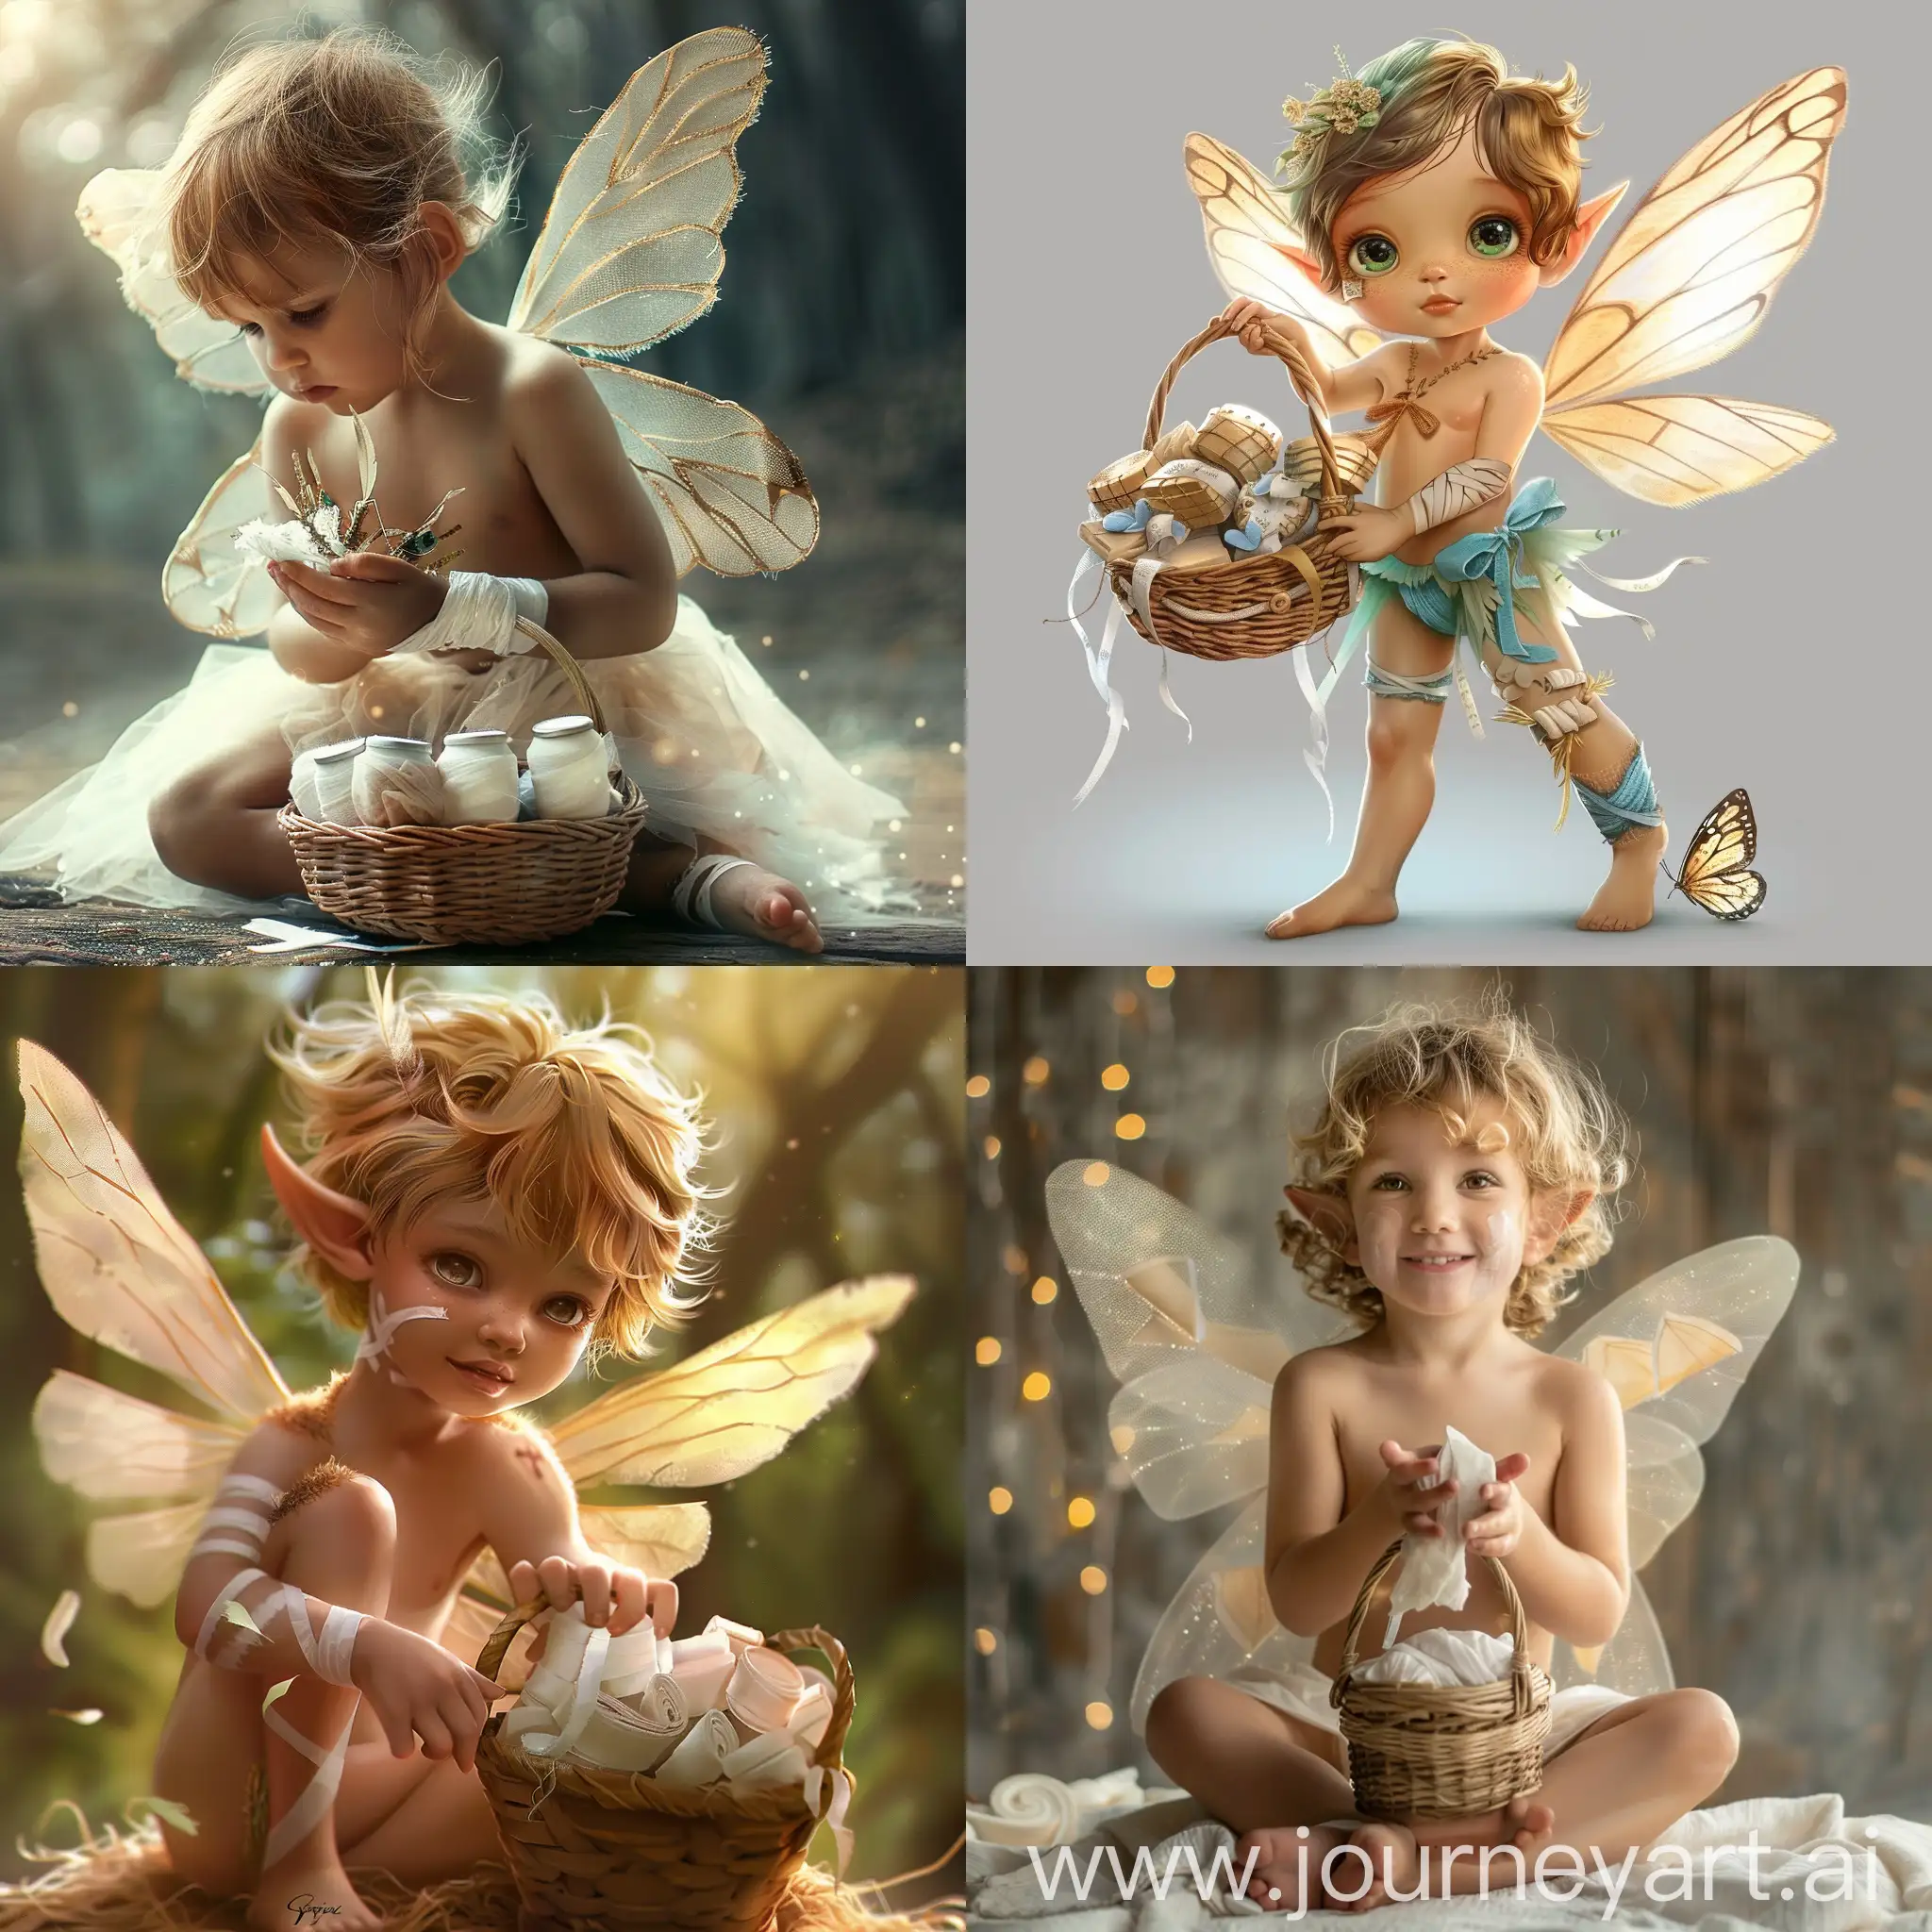 cute fantasy fairy kid with small basket full of bandages